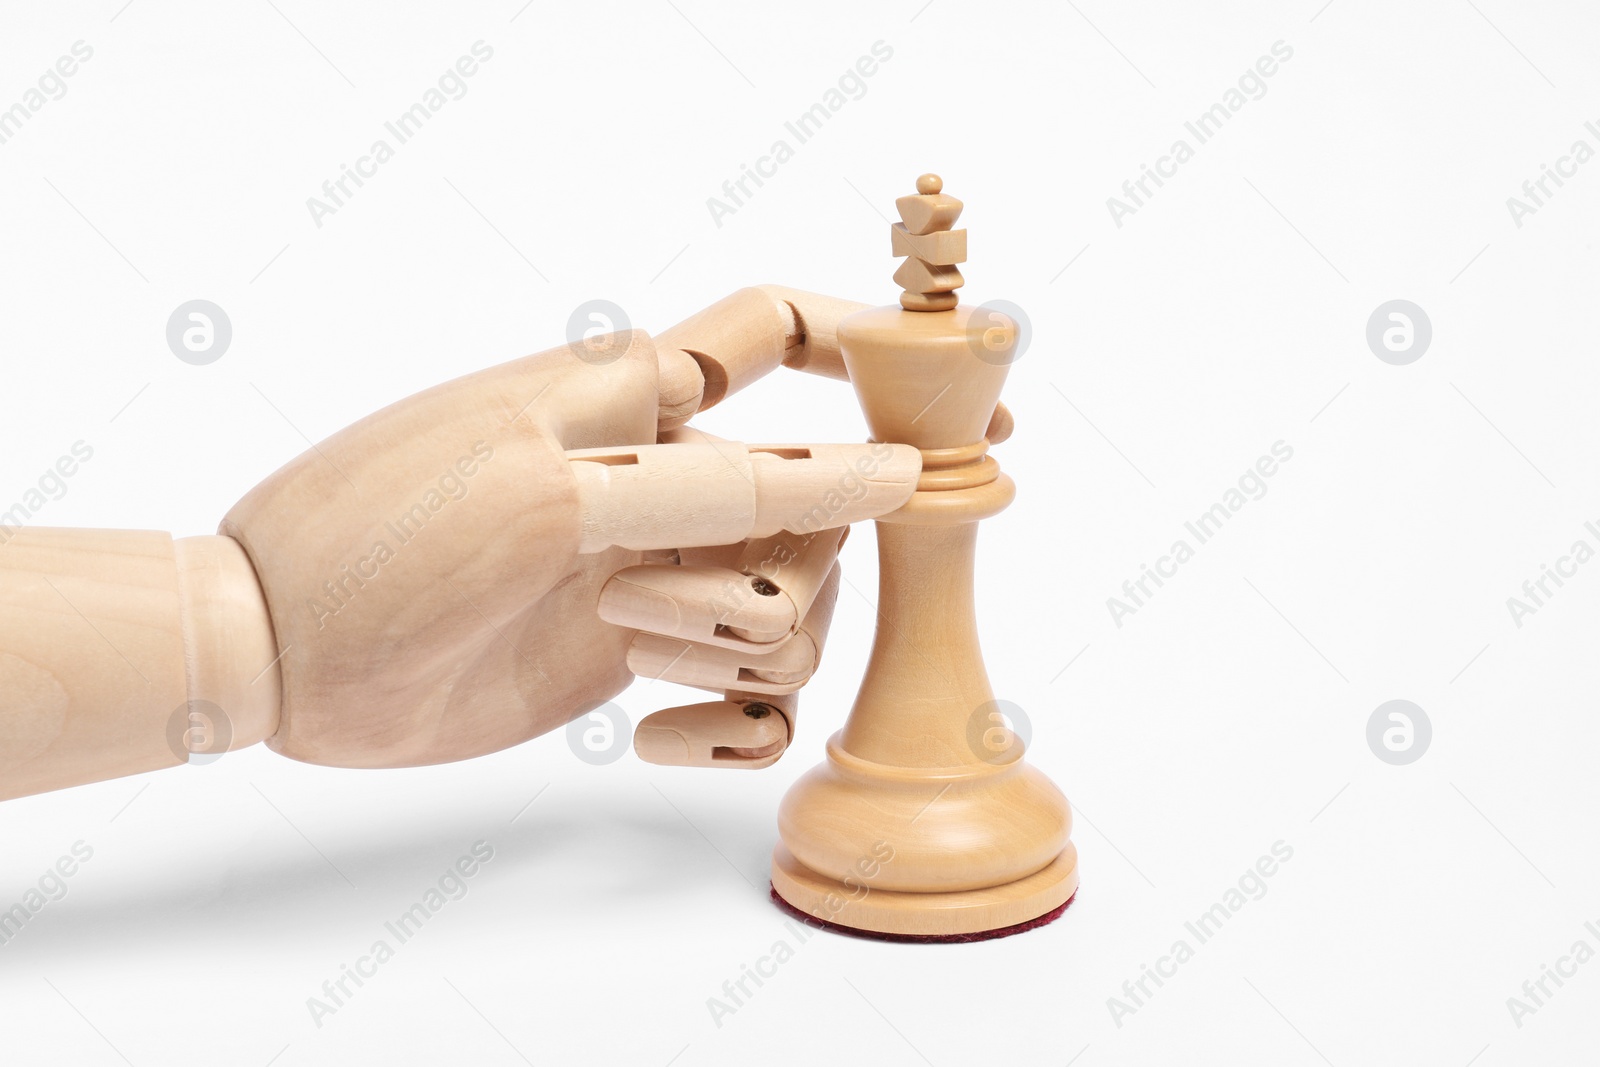 Photo of Robot with chess piece on white background. Wooden hand representing artificial intelligence